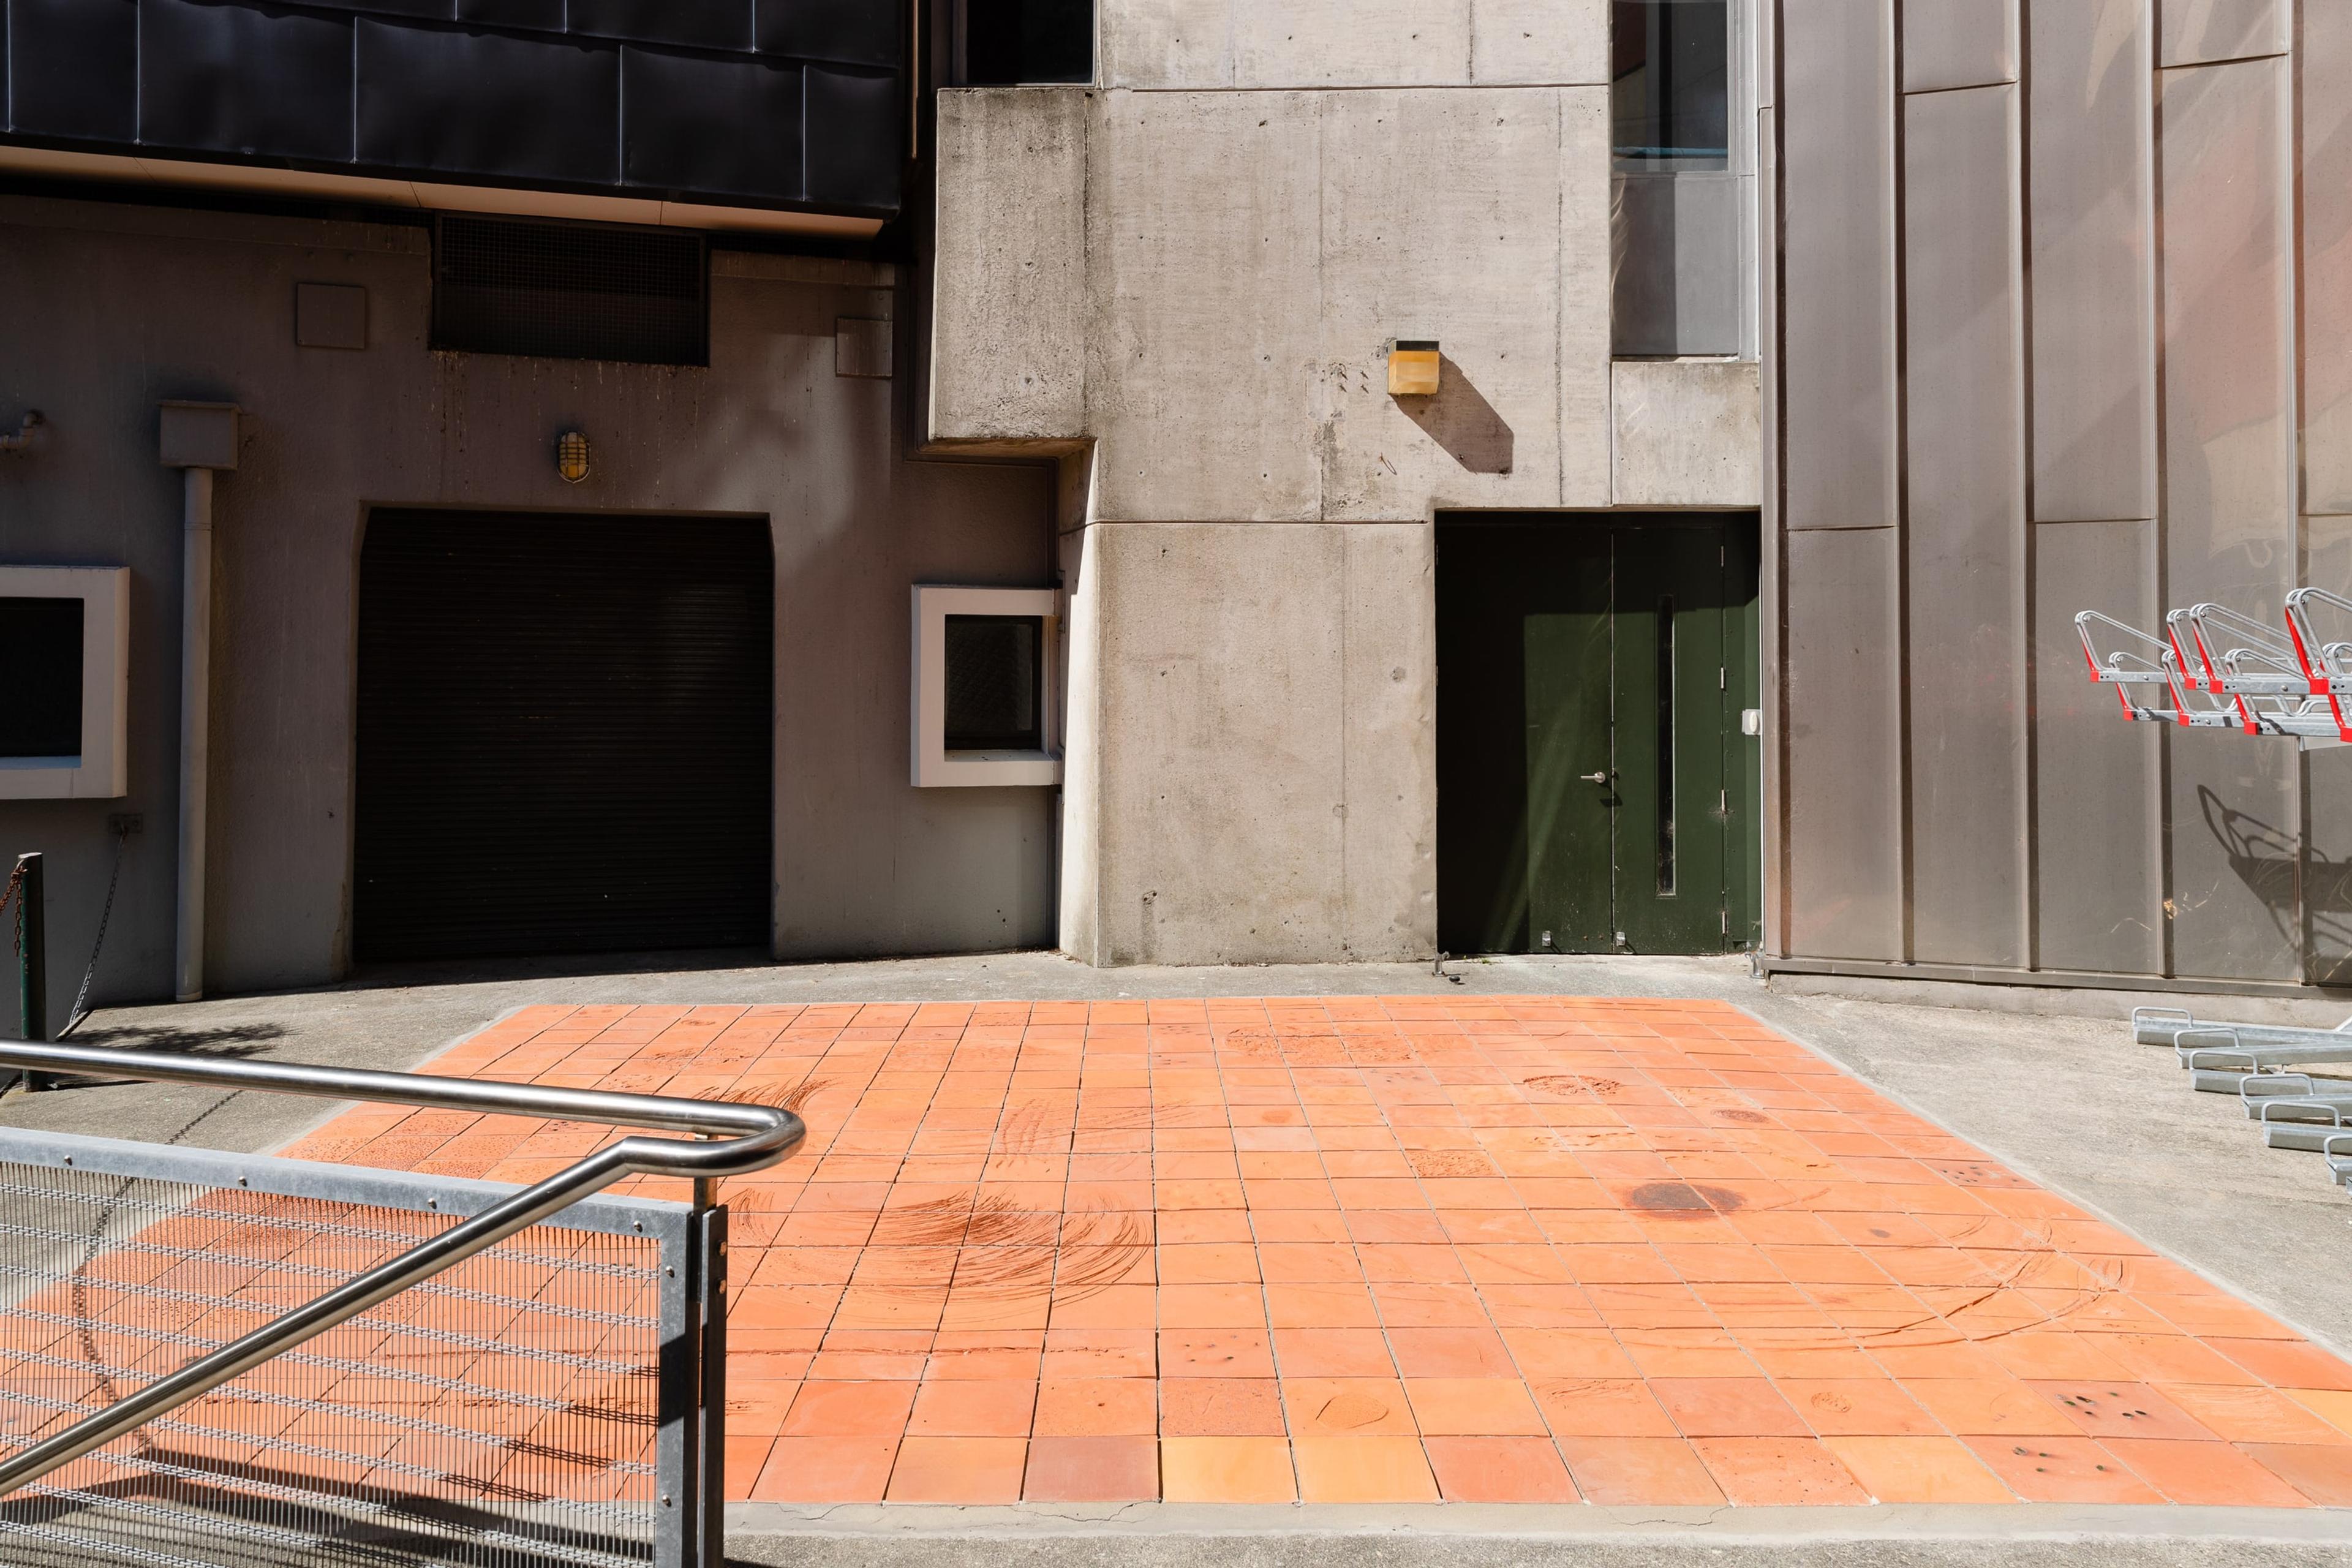 photograph of a flat area of terracotta tiles next to a grey concrete building and a stair rail obscuring it on the left side